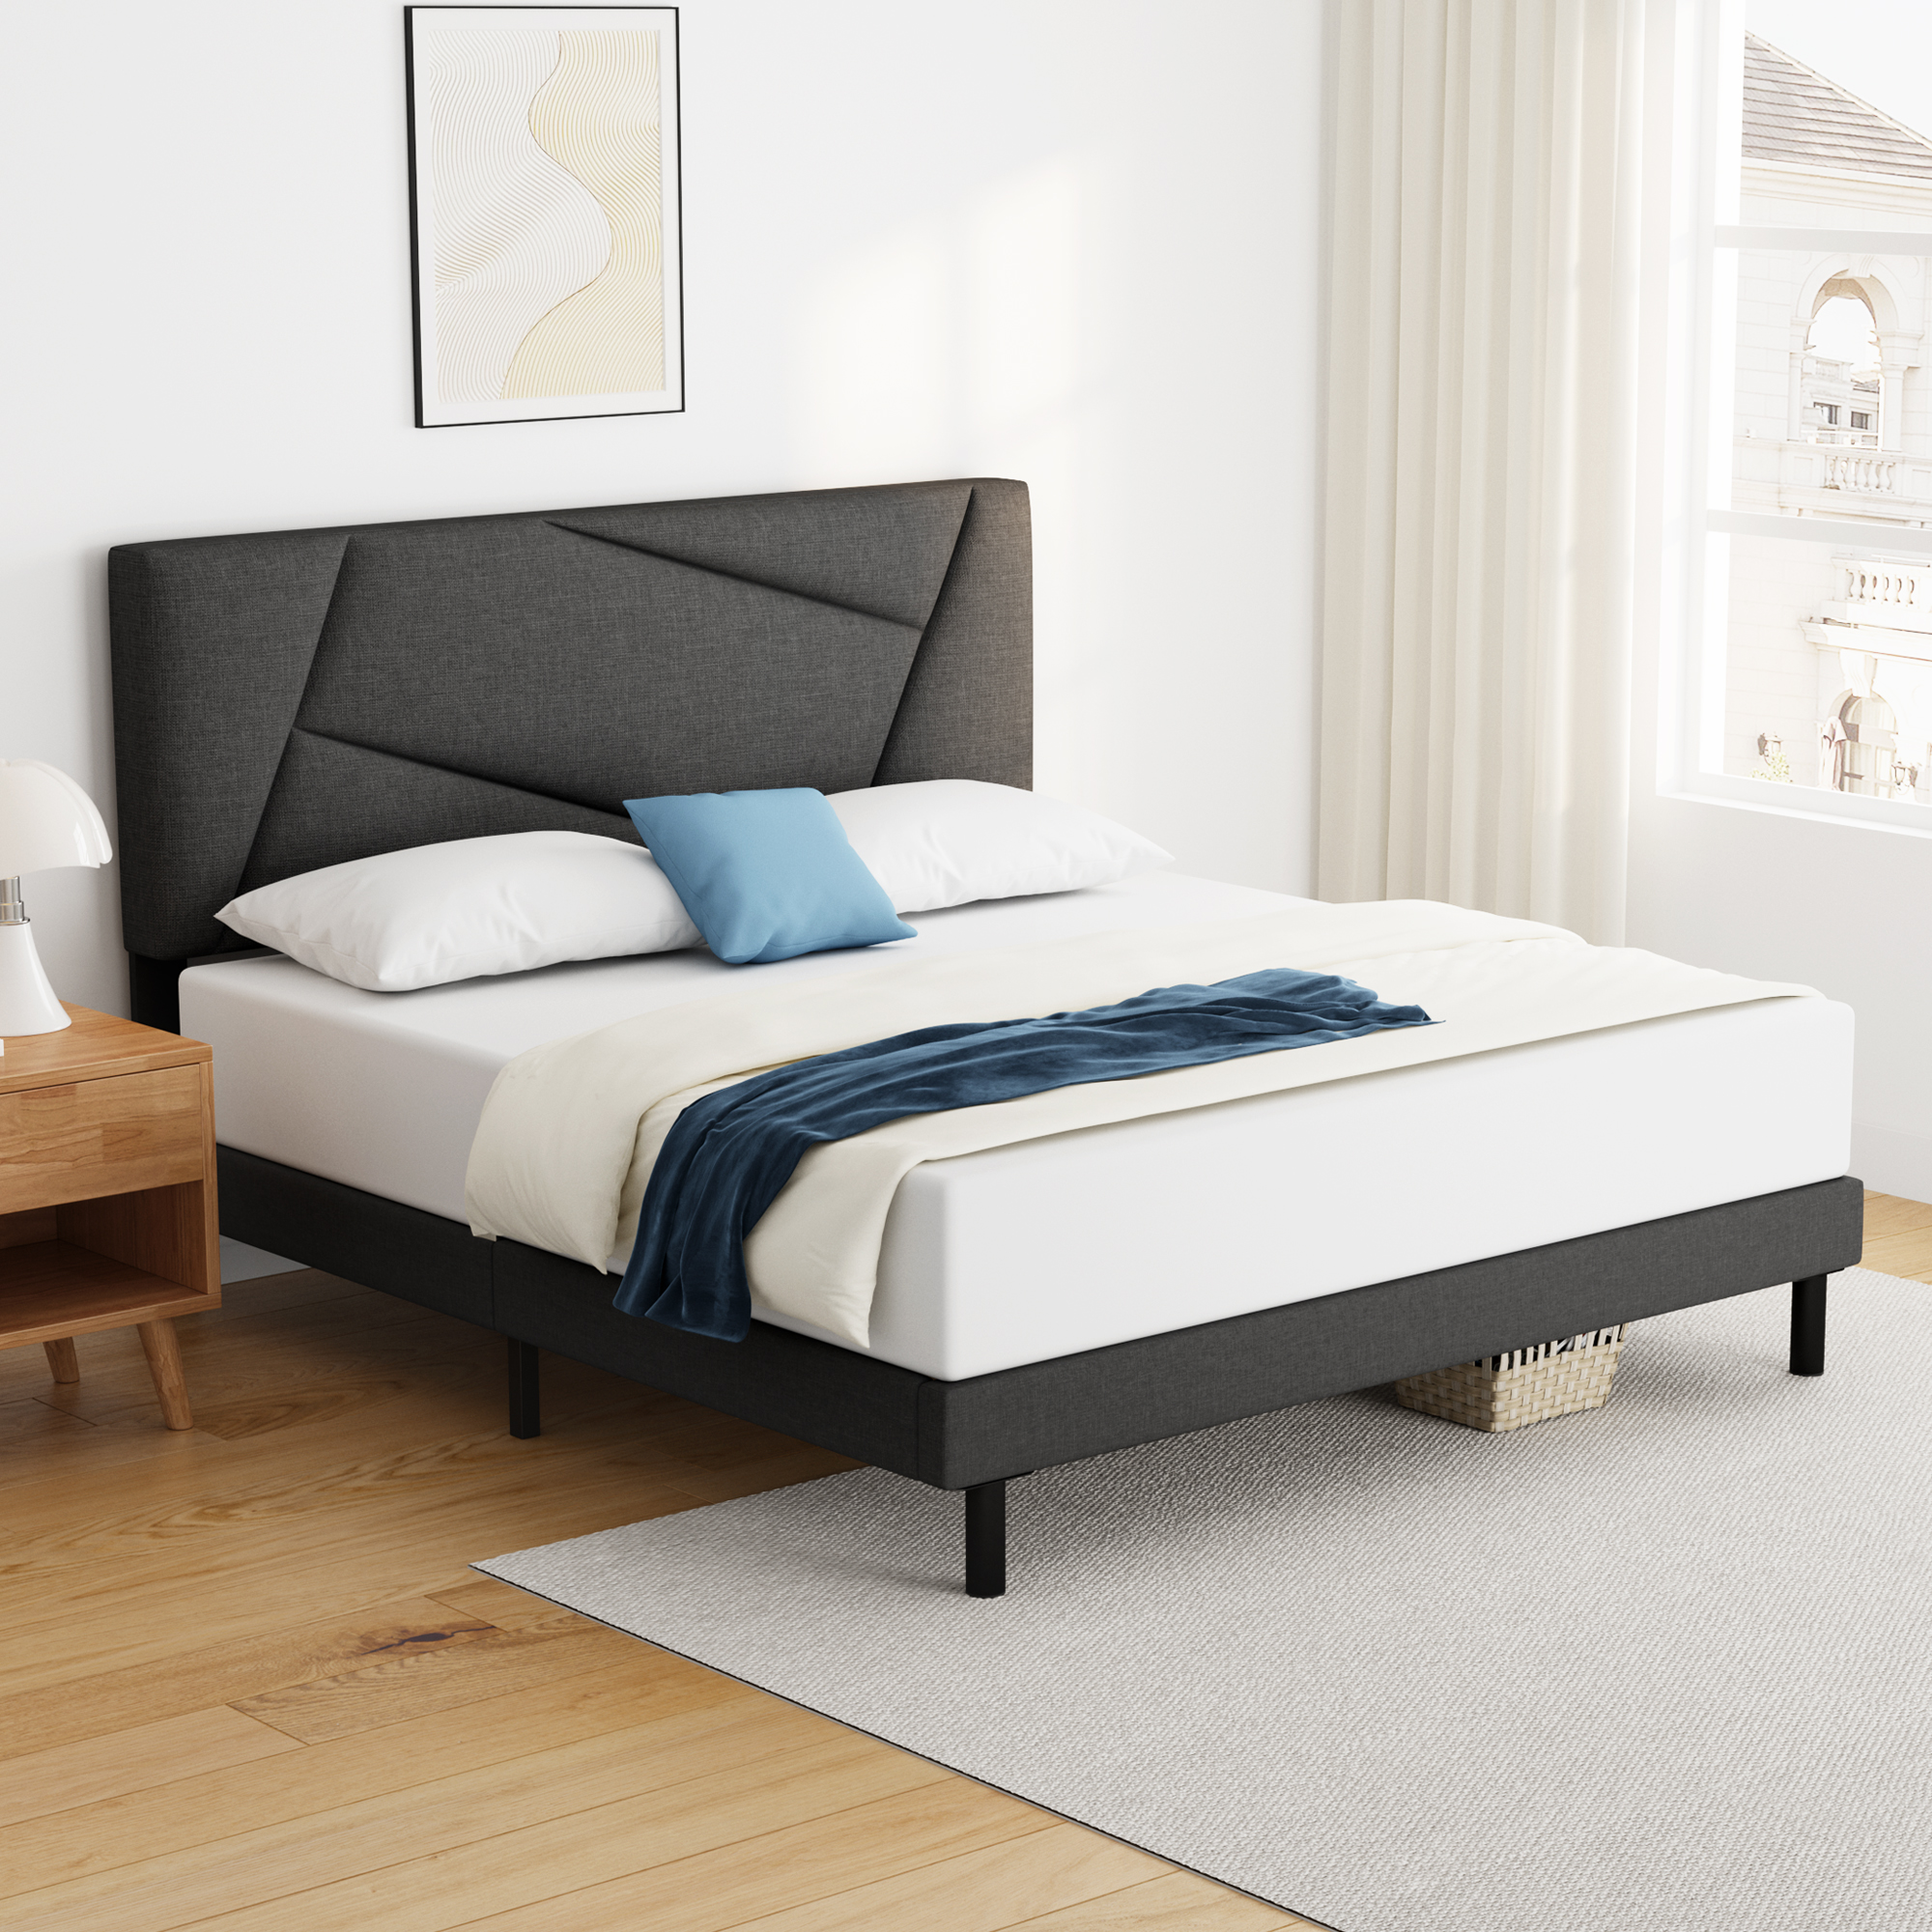 Queen Bed Frame, HAIIDE Queen Size Platform Bed Frame with Fabric Upholstered Headboard, Dark Grey - image 2 of 7